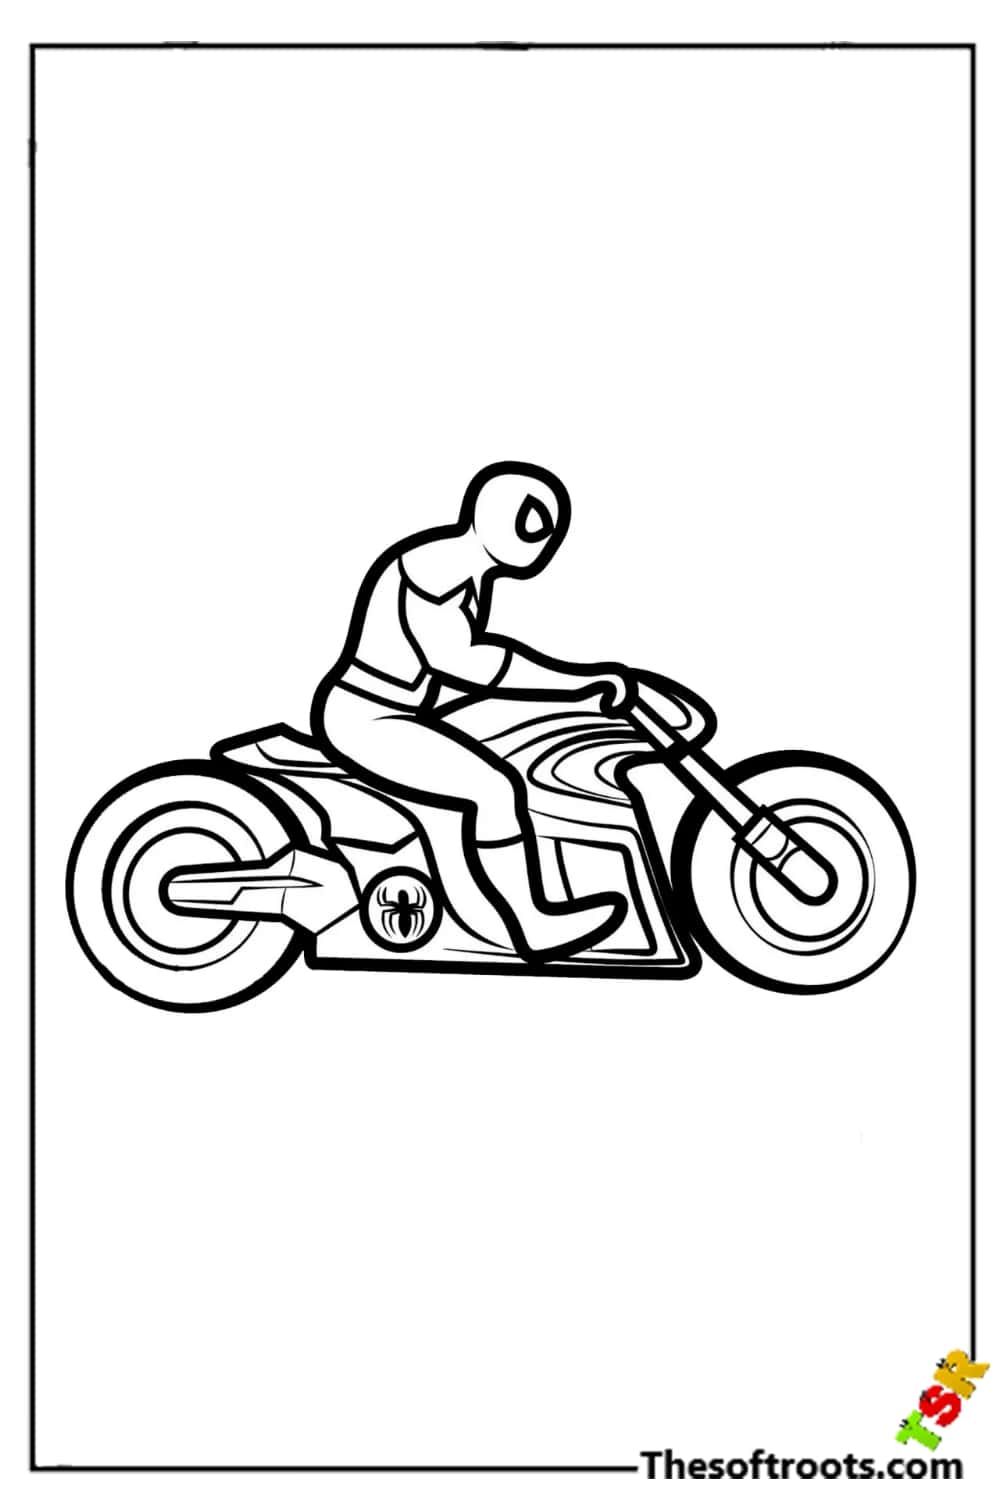 Spiderman driving bike coloring pages